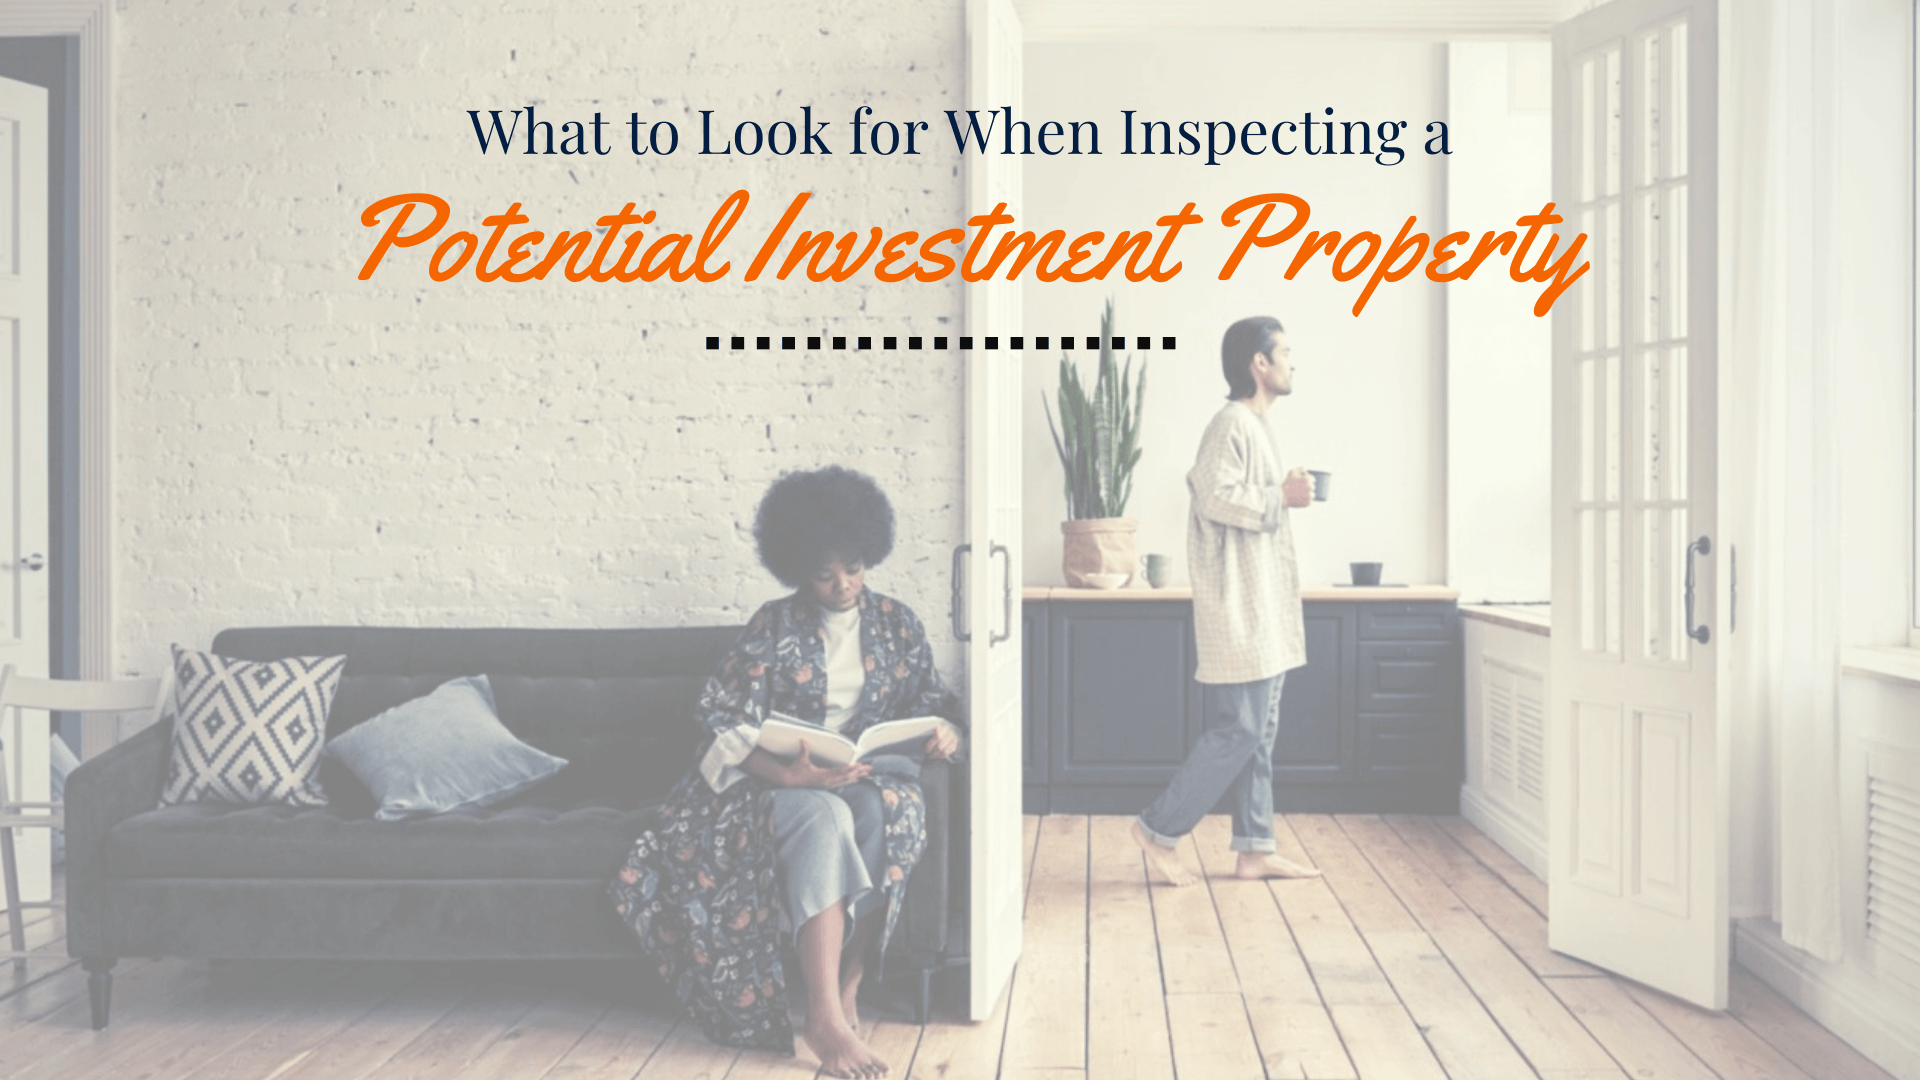 What to Look for When Inspecting a Potential San Diego Investment Property - article banner